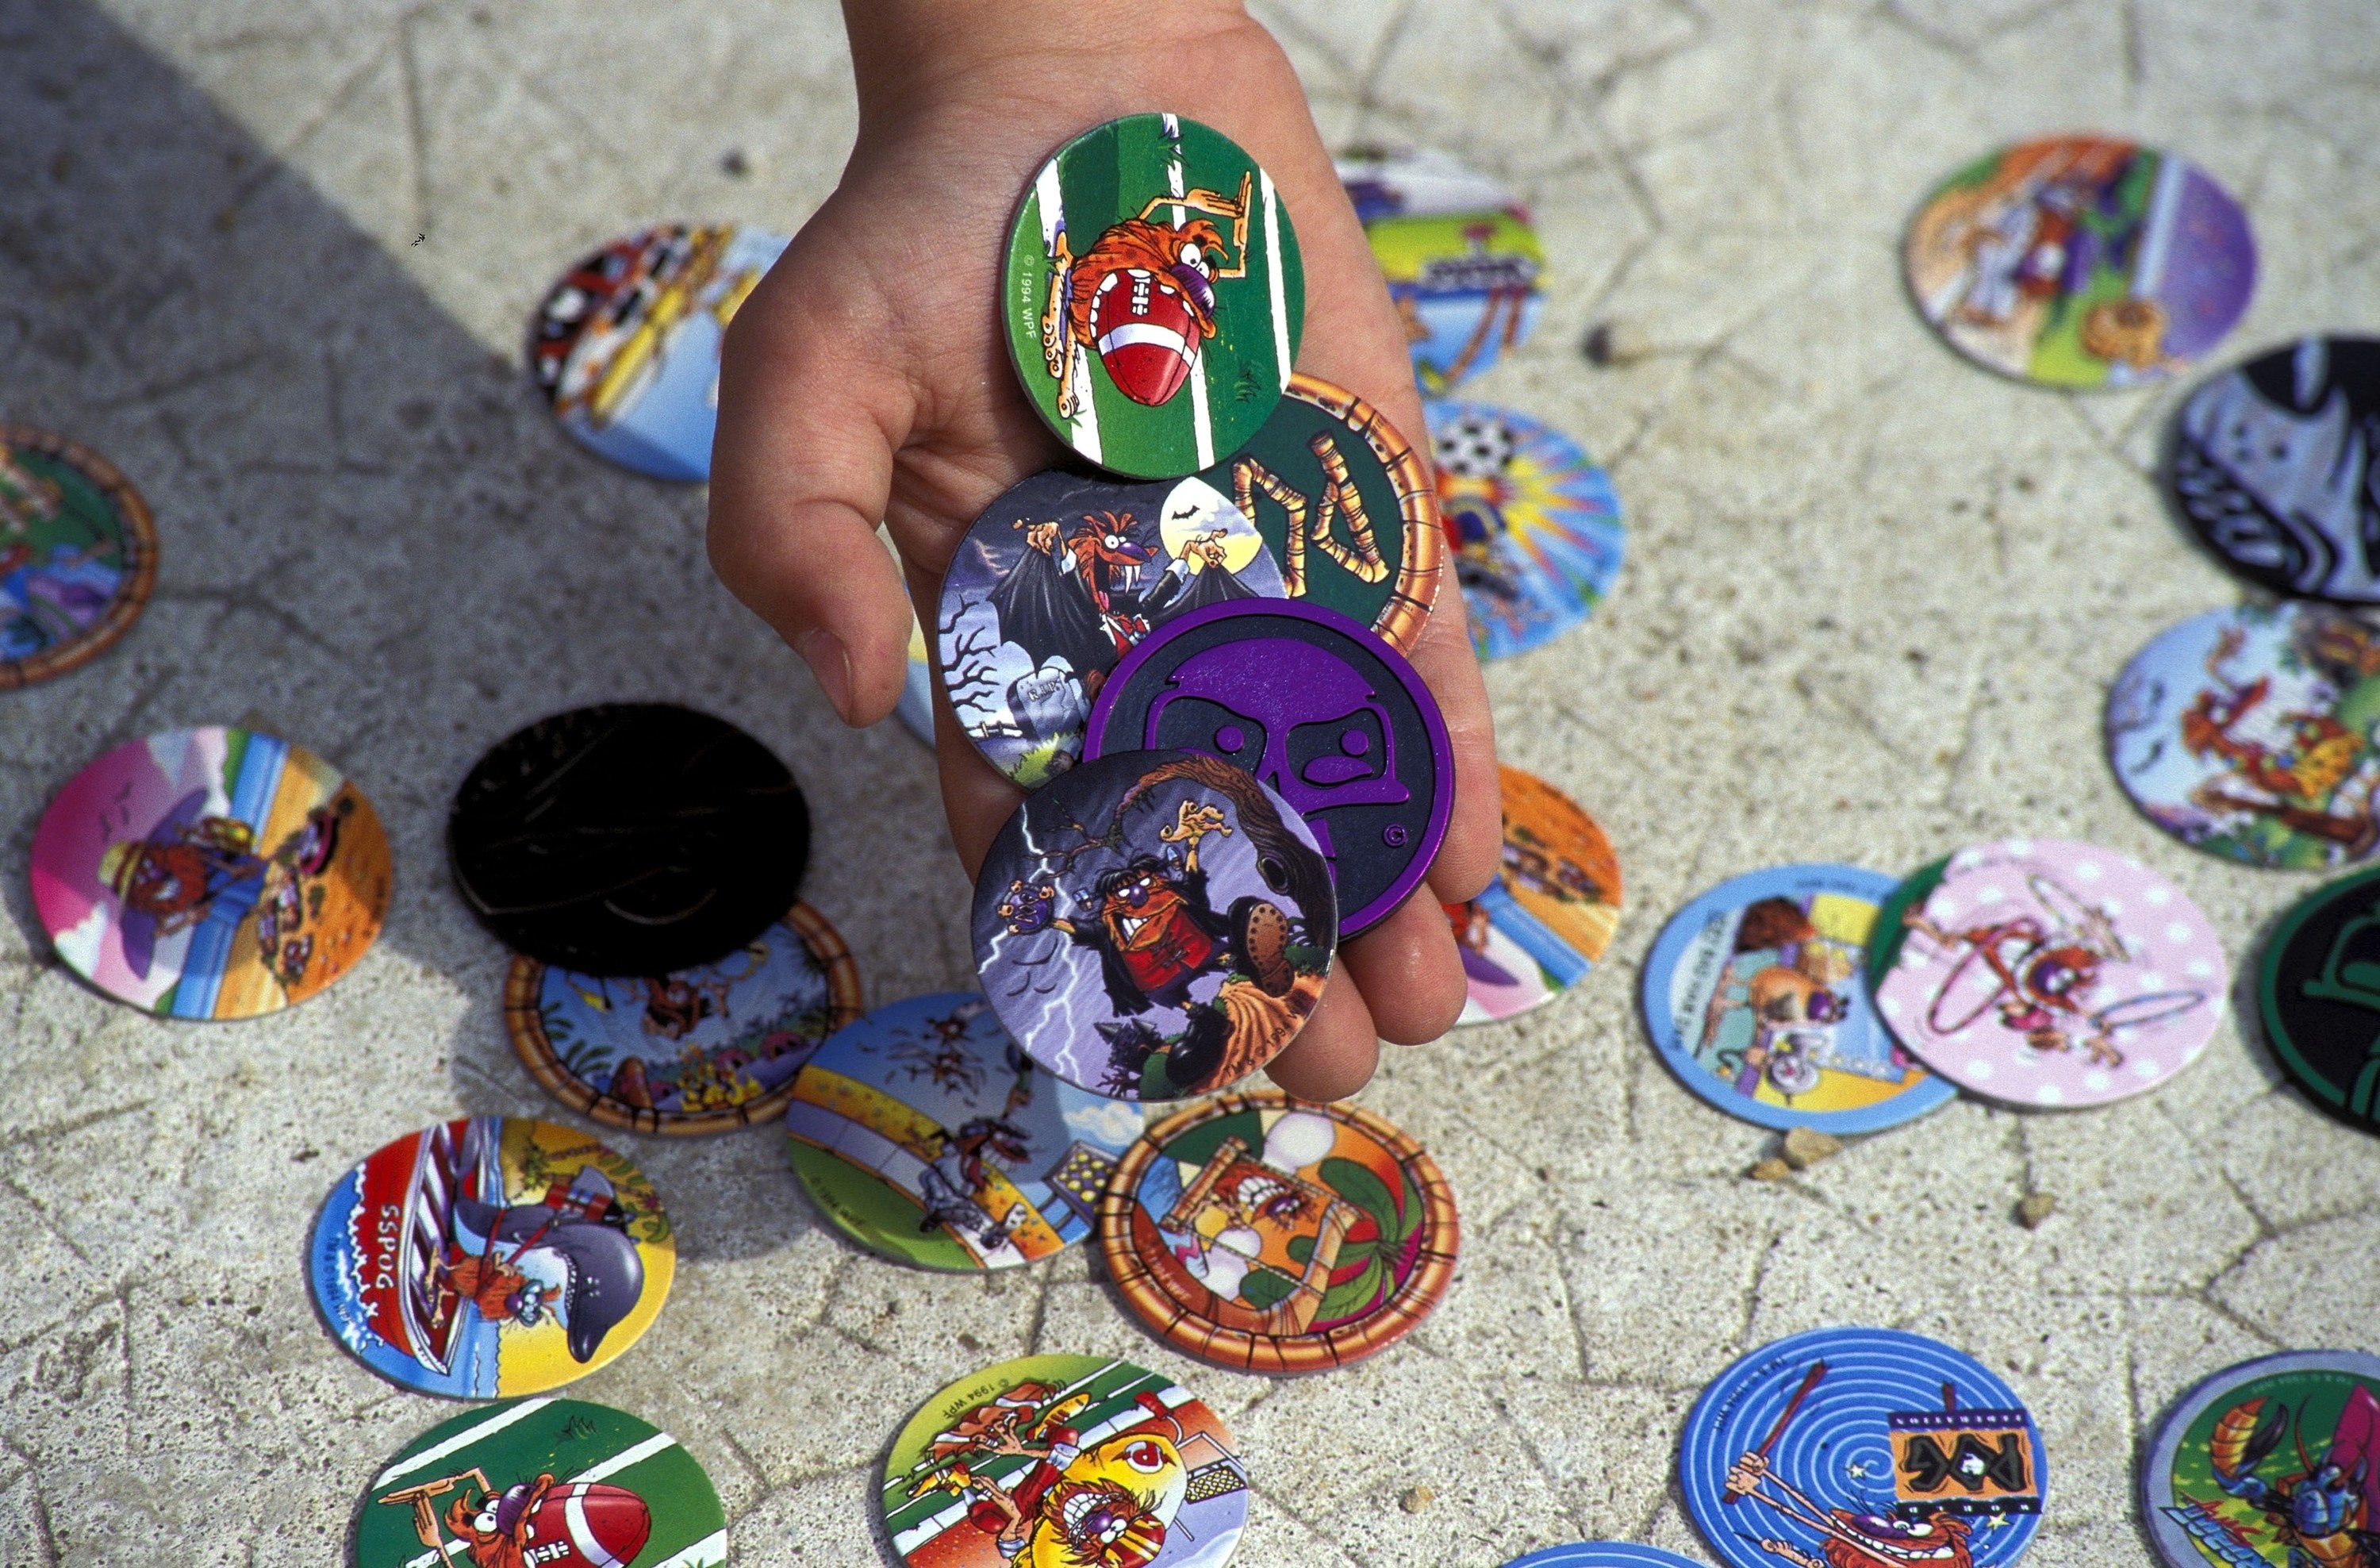 a kid holding pogs